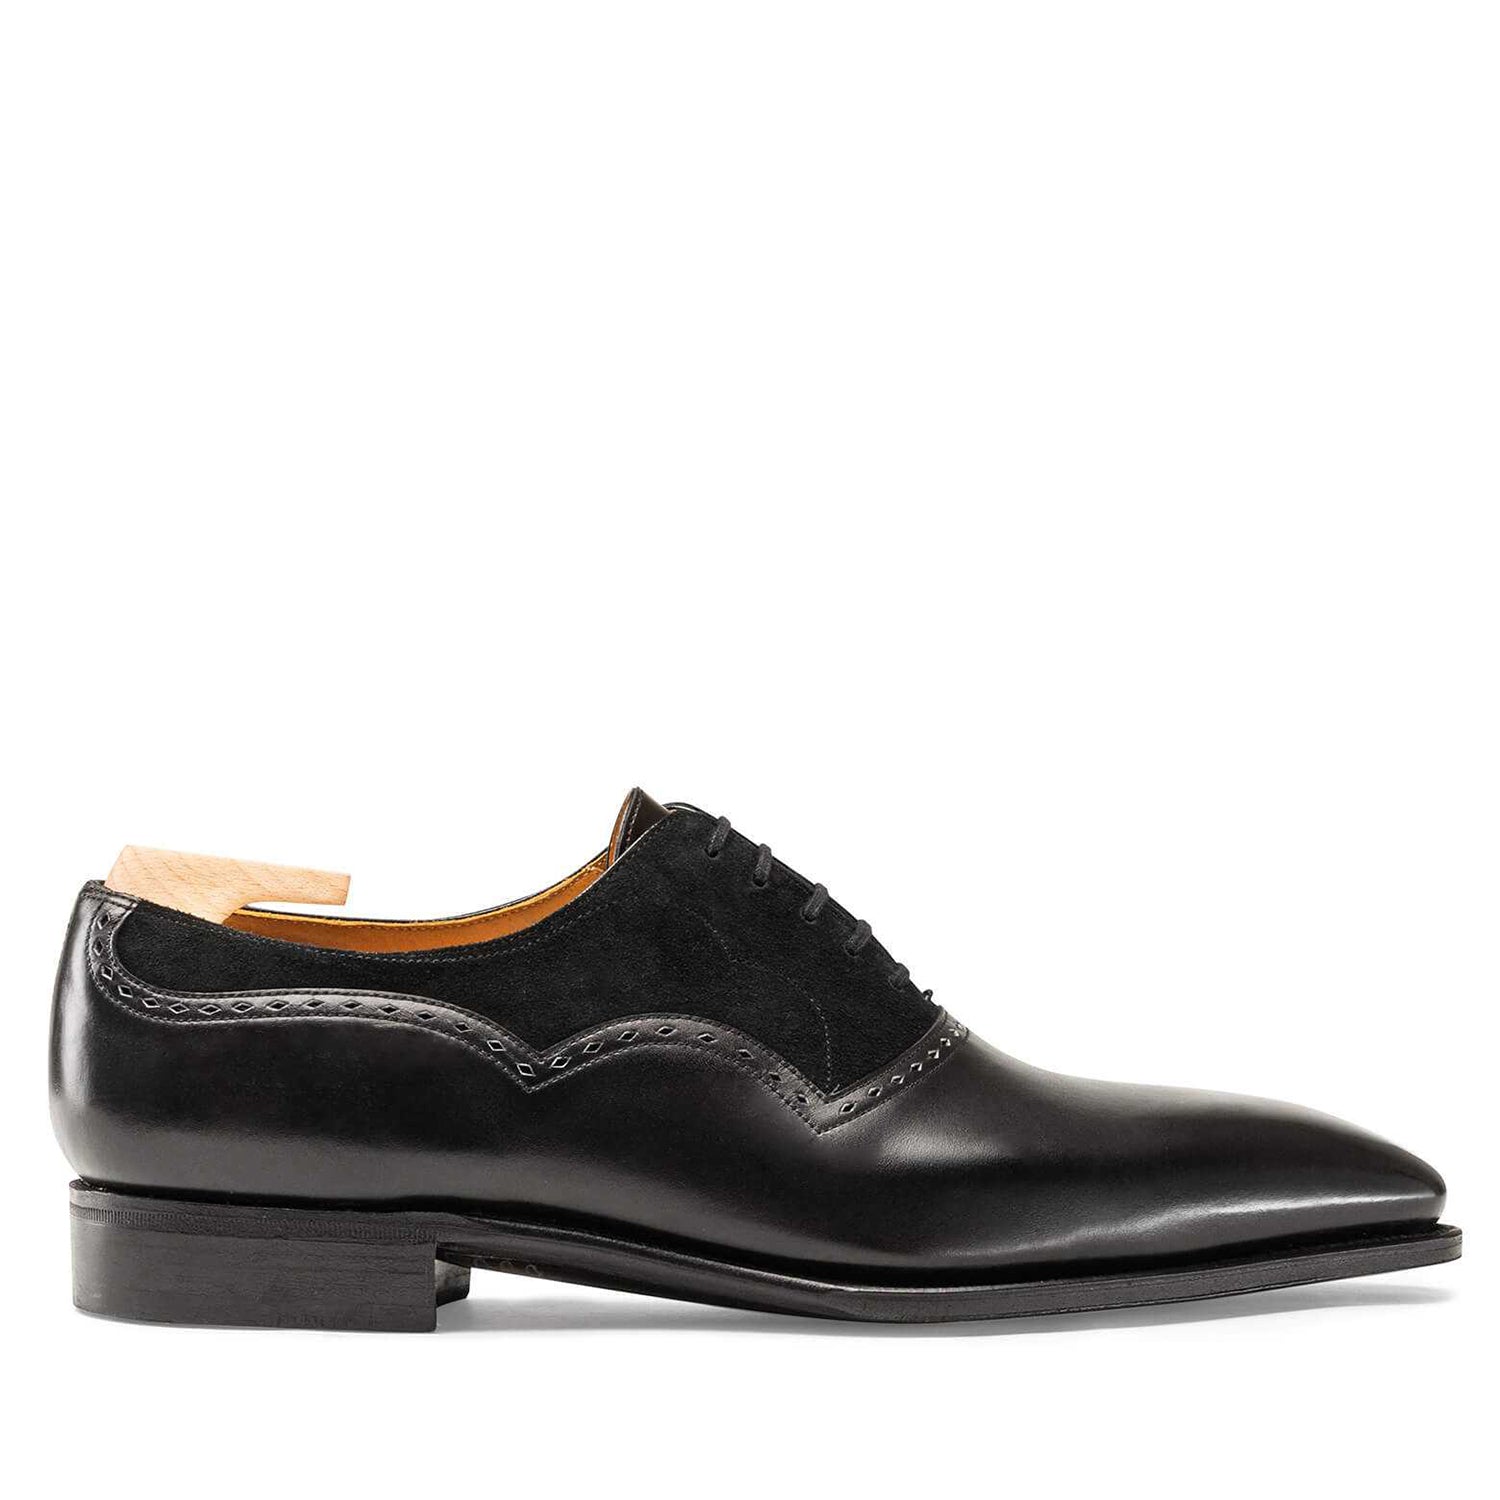 WILFRID CALF AND SUEDE CALF LEATHER BLACK